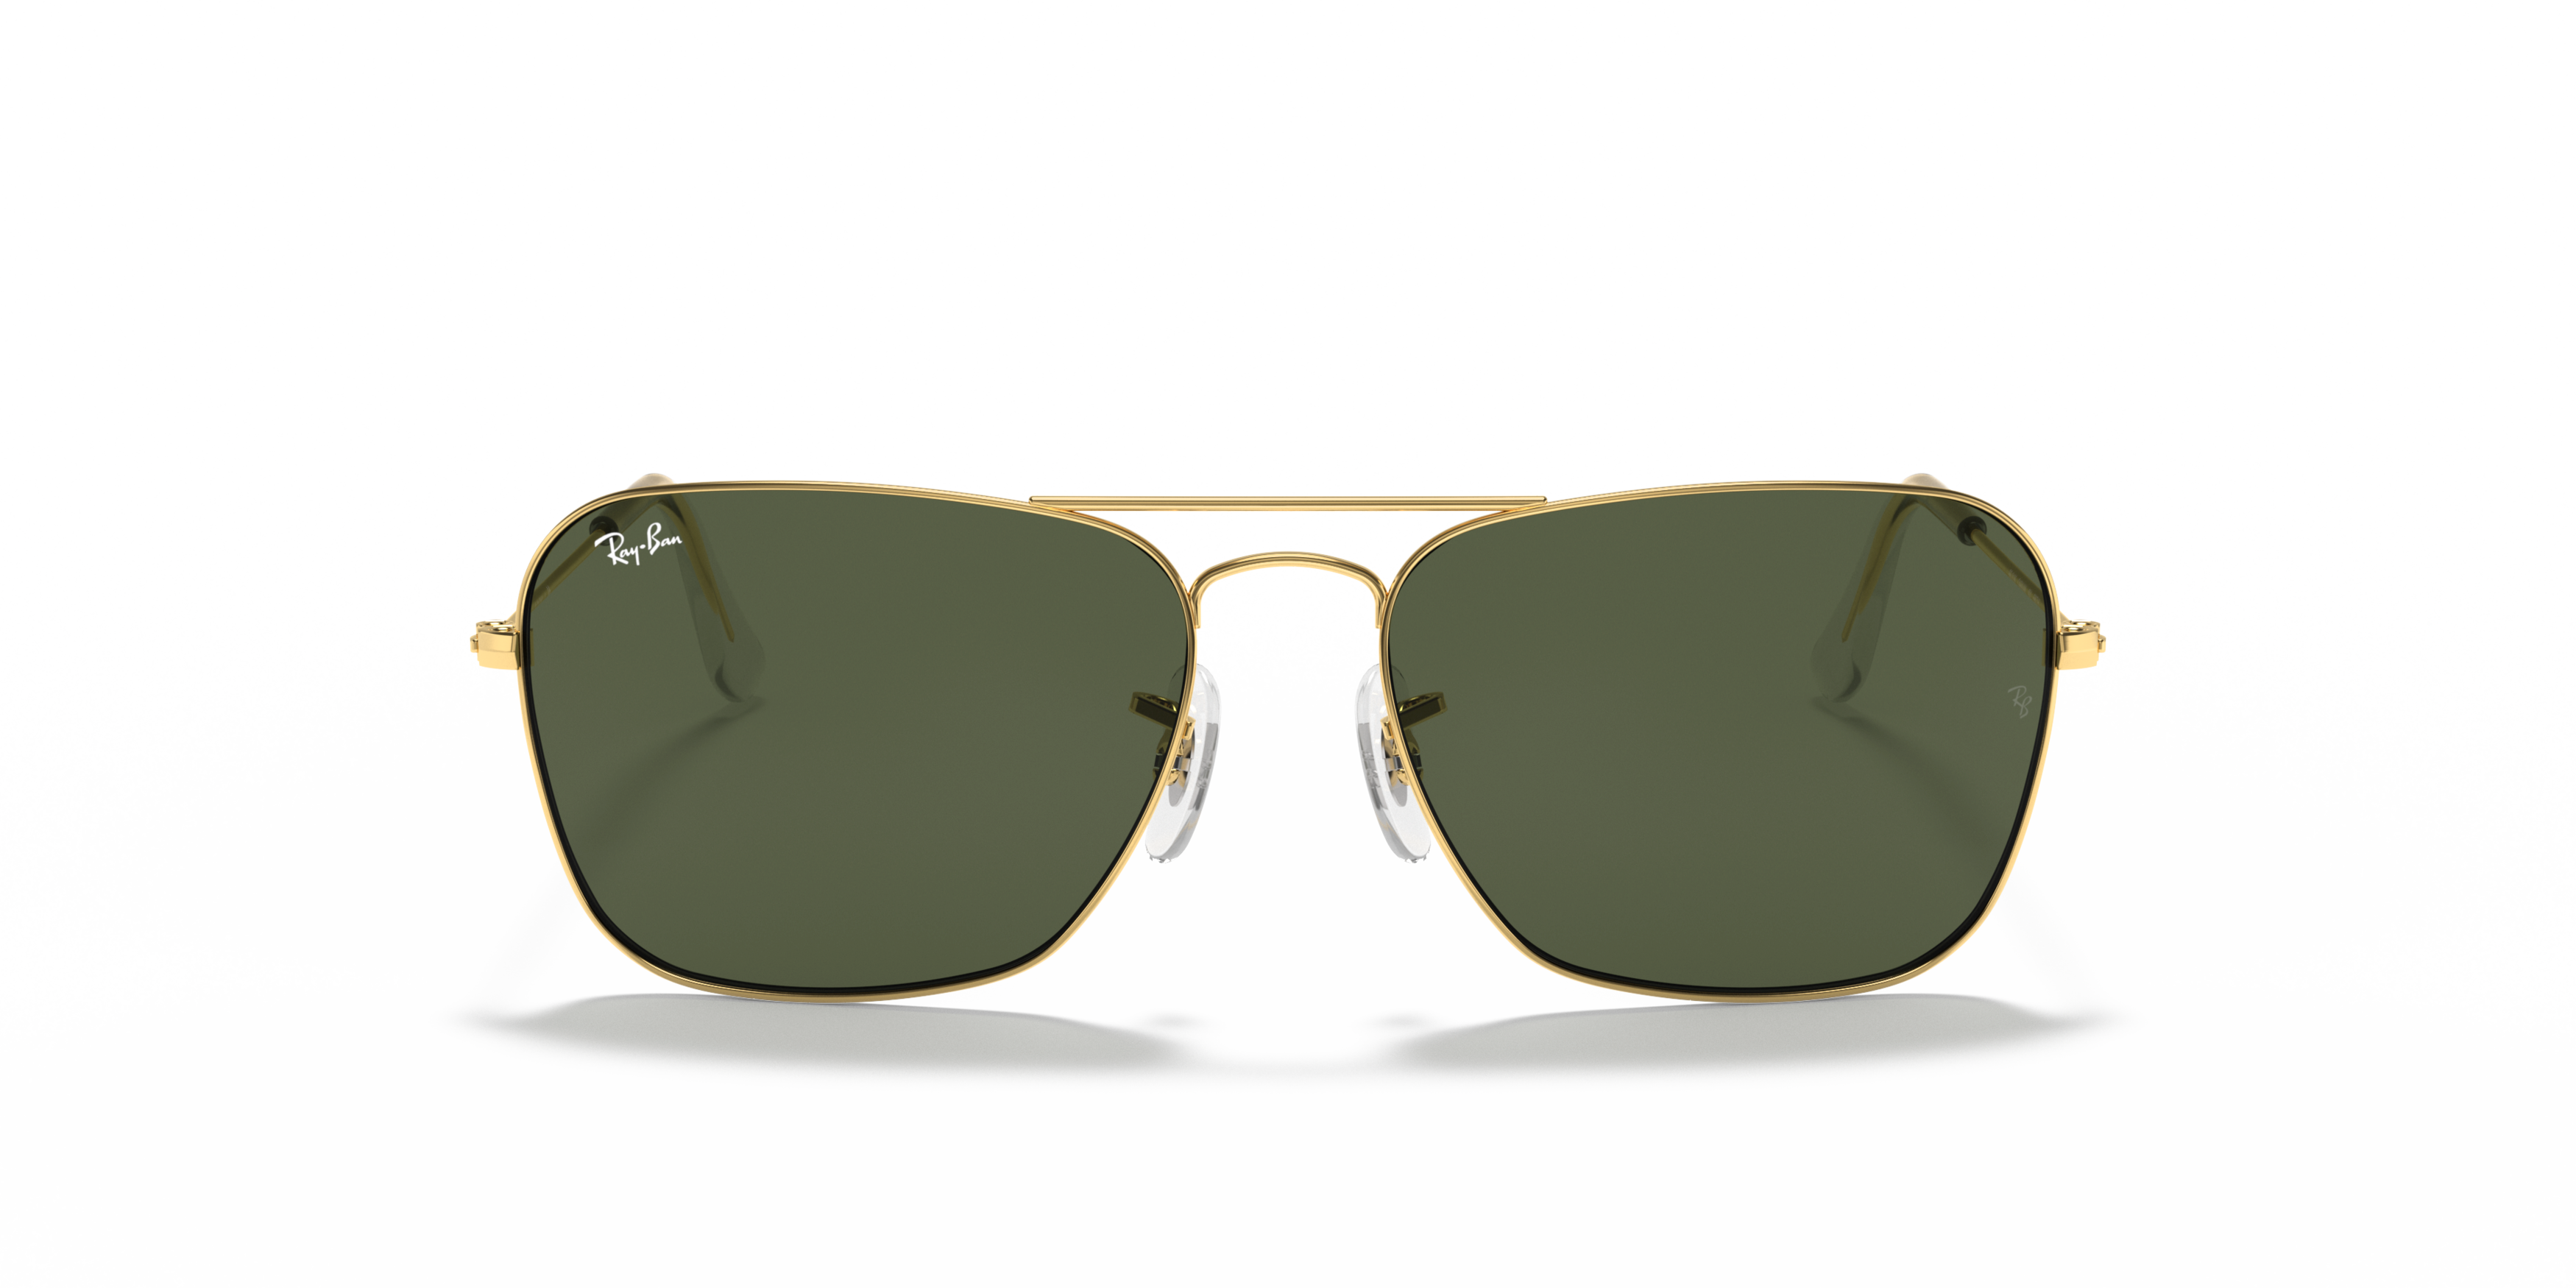 [products.image.front] Ray-Ban Caravan RB3136 001